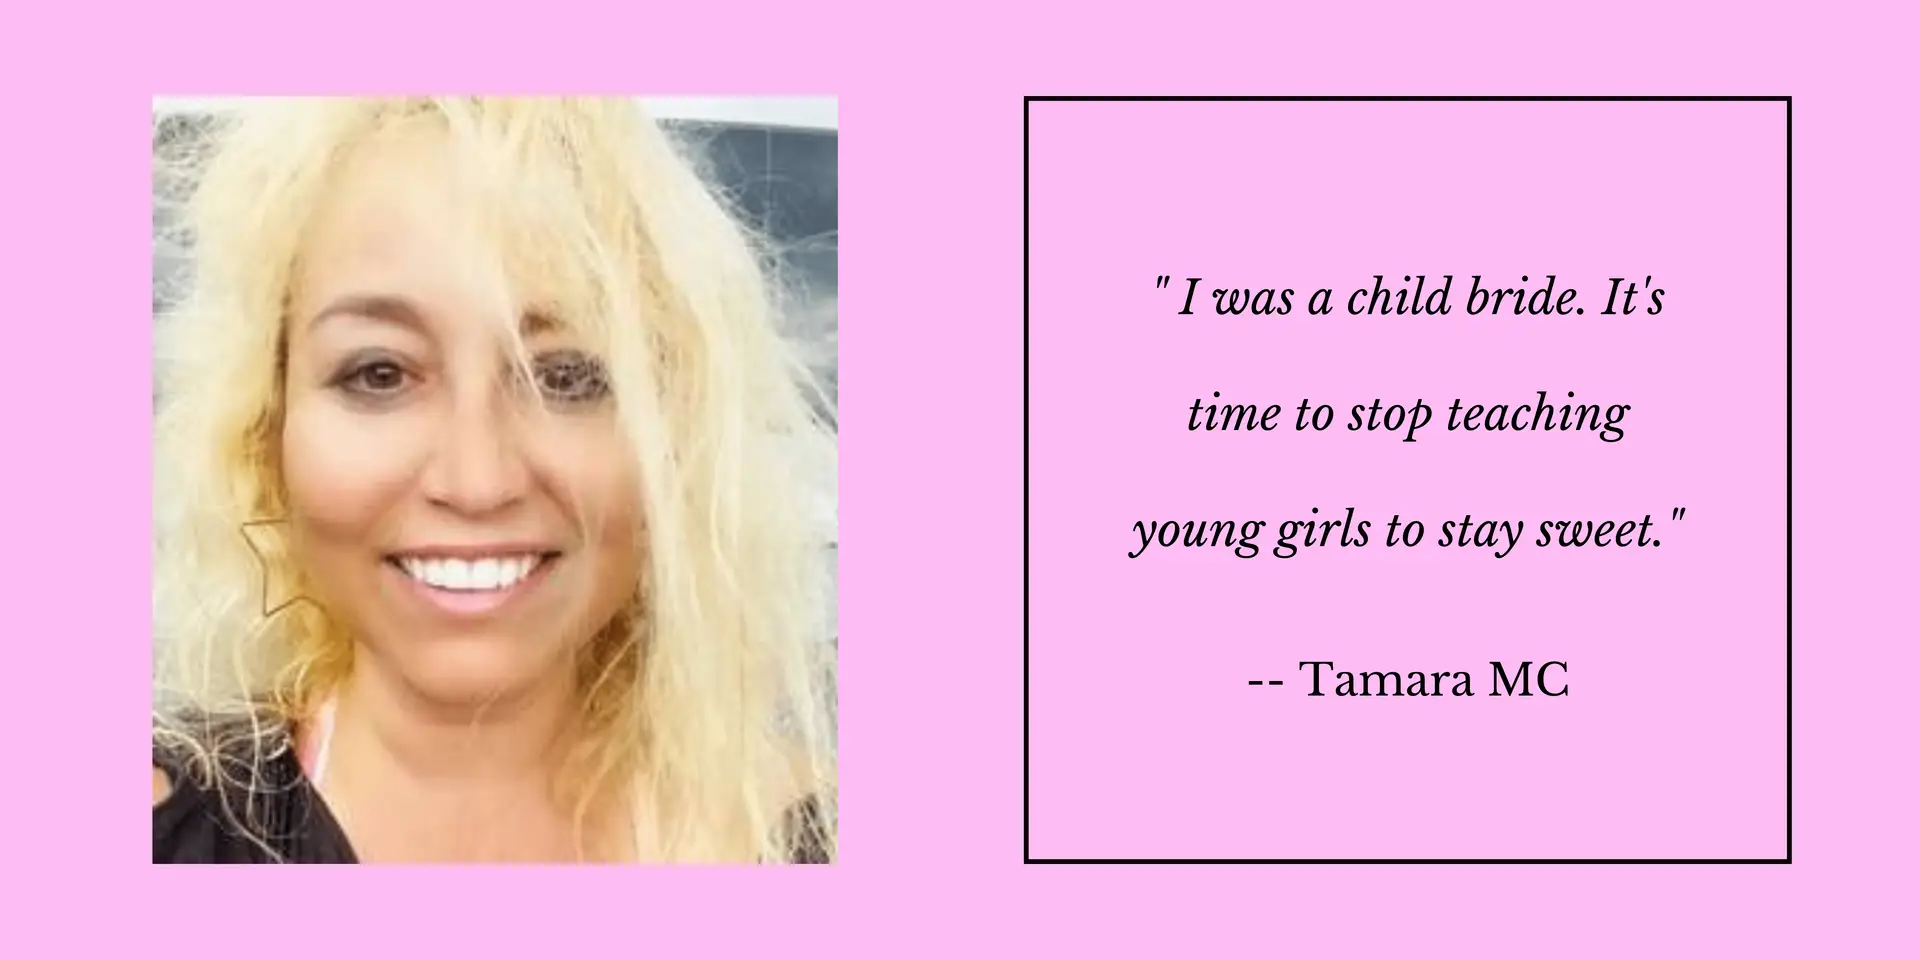 Dr. Tamara MC with blonde hair is wearing star earrings and she is saying, "I was a child bride. It's time to stop teaching young girls to stay sweet."